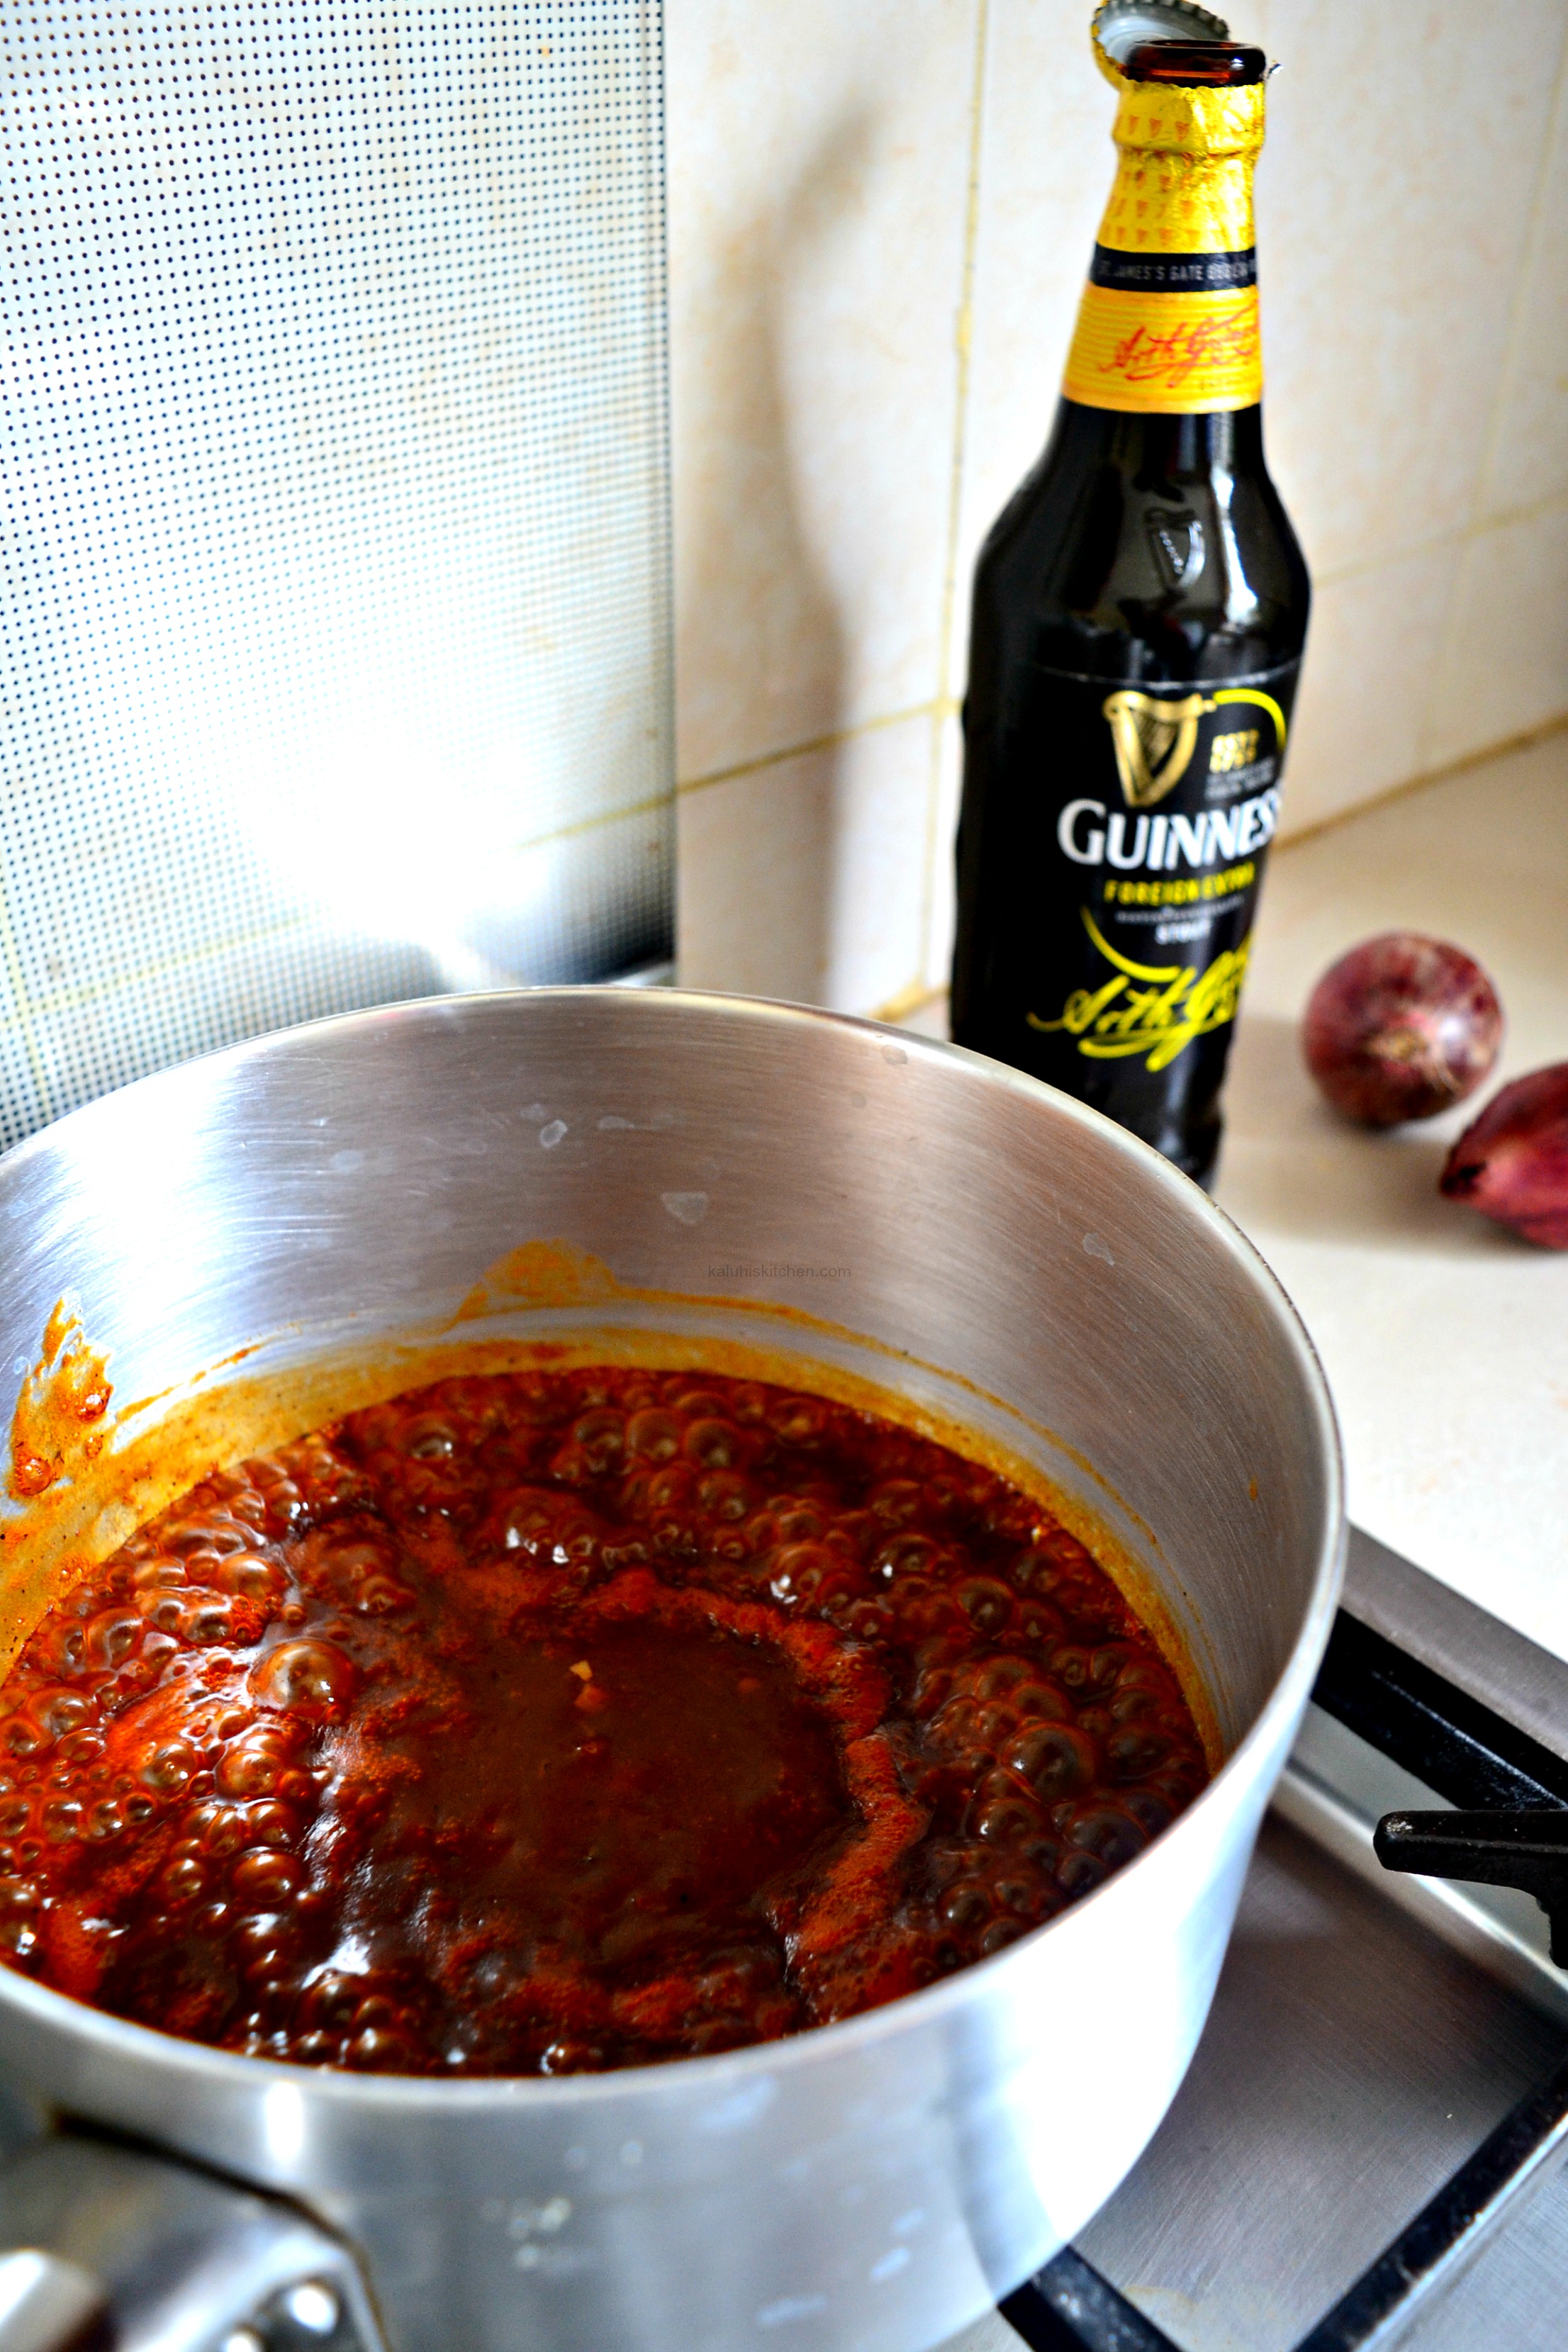 allow-the-sauce-to-simmer_adding-guinness-to-the-sauce-makes-it-thicker-darker-and-adds-a-more-fullere-more-layered-flavor_kaluhiskitchen-com_kaluhi-adagala-best-african-food-blog